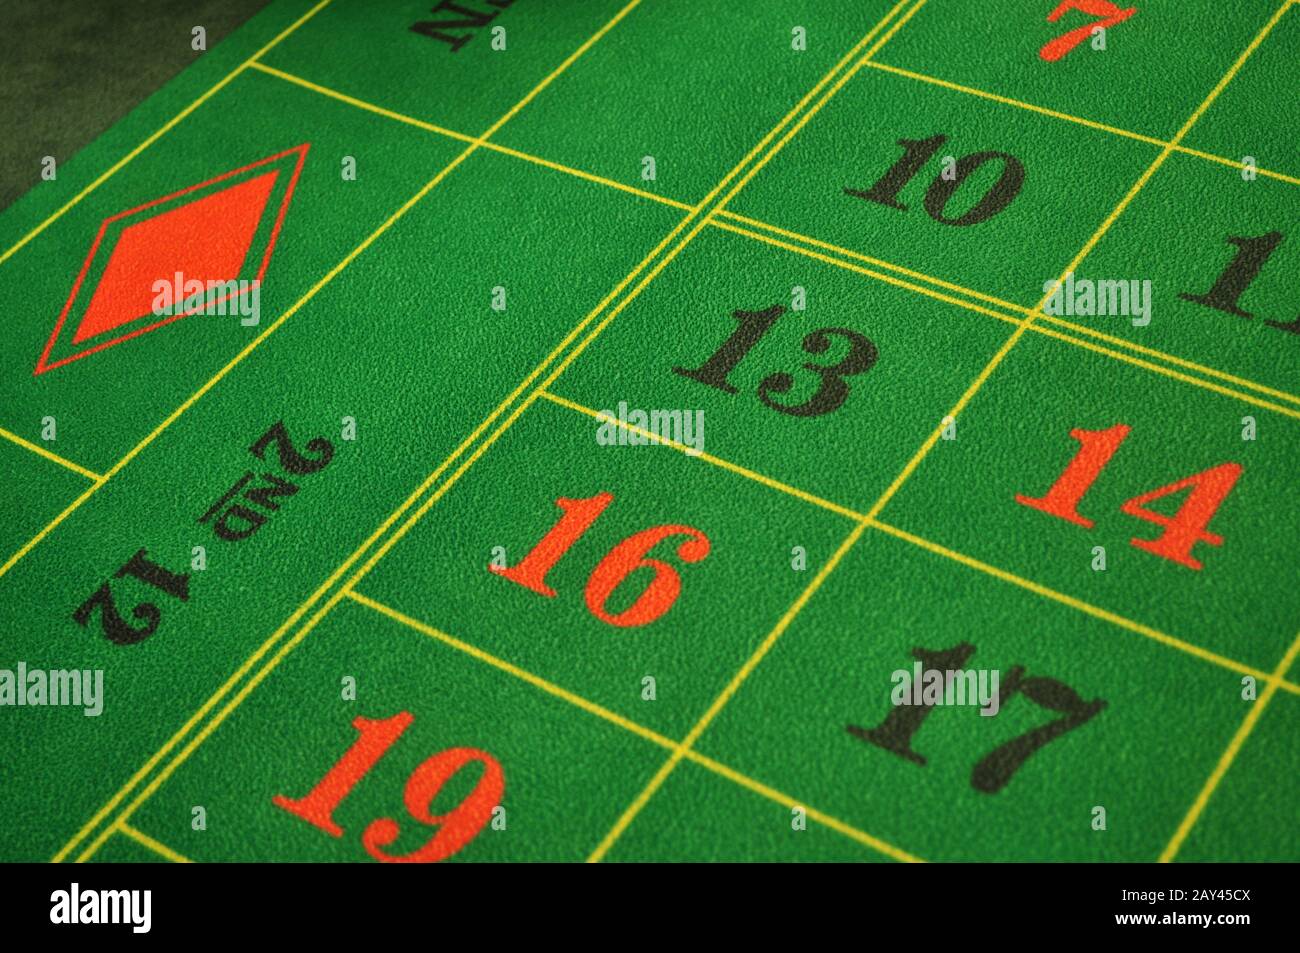 roulette layout Stock Photo